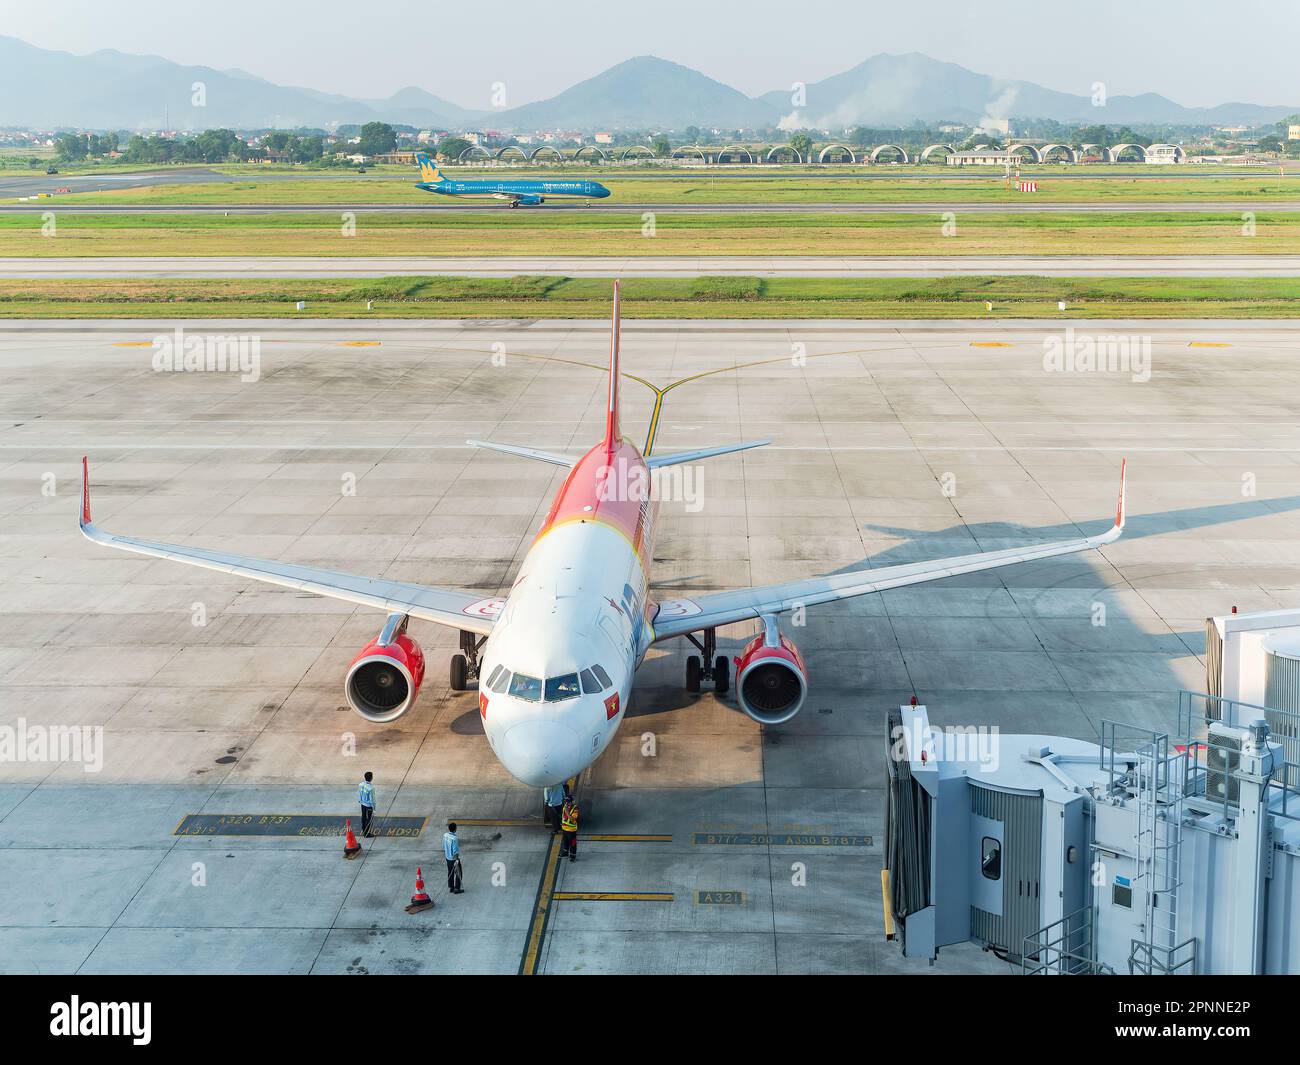 Vietjet Airbus A320 arriving at a gate at Noi Bai International Airport (NIA), the main airport of Hanoi, the capital of Vietnam. Vietnam Airlines Air Stock Photo